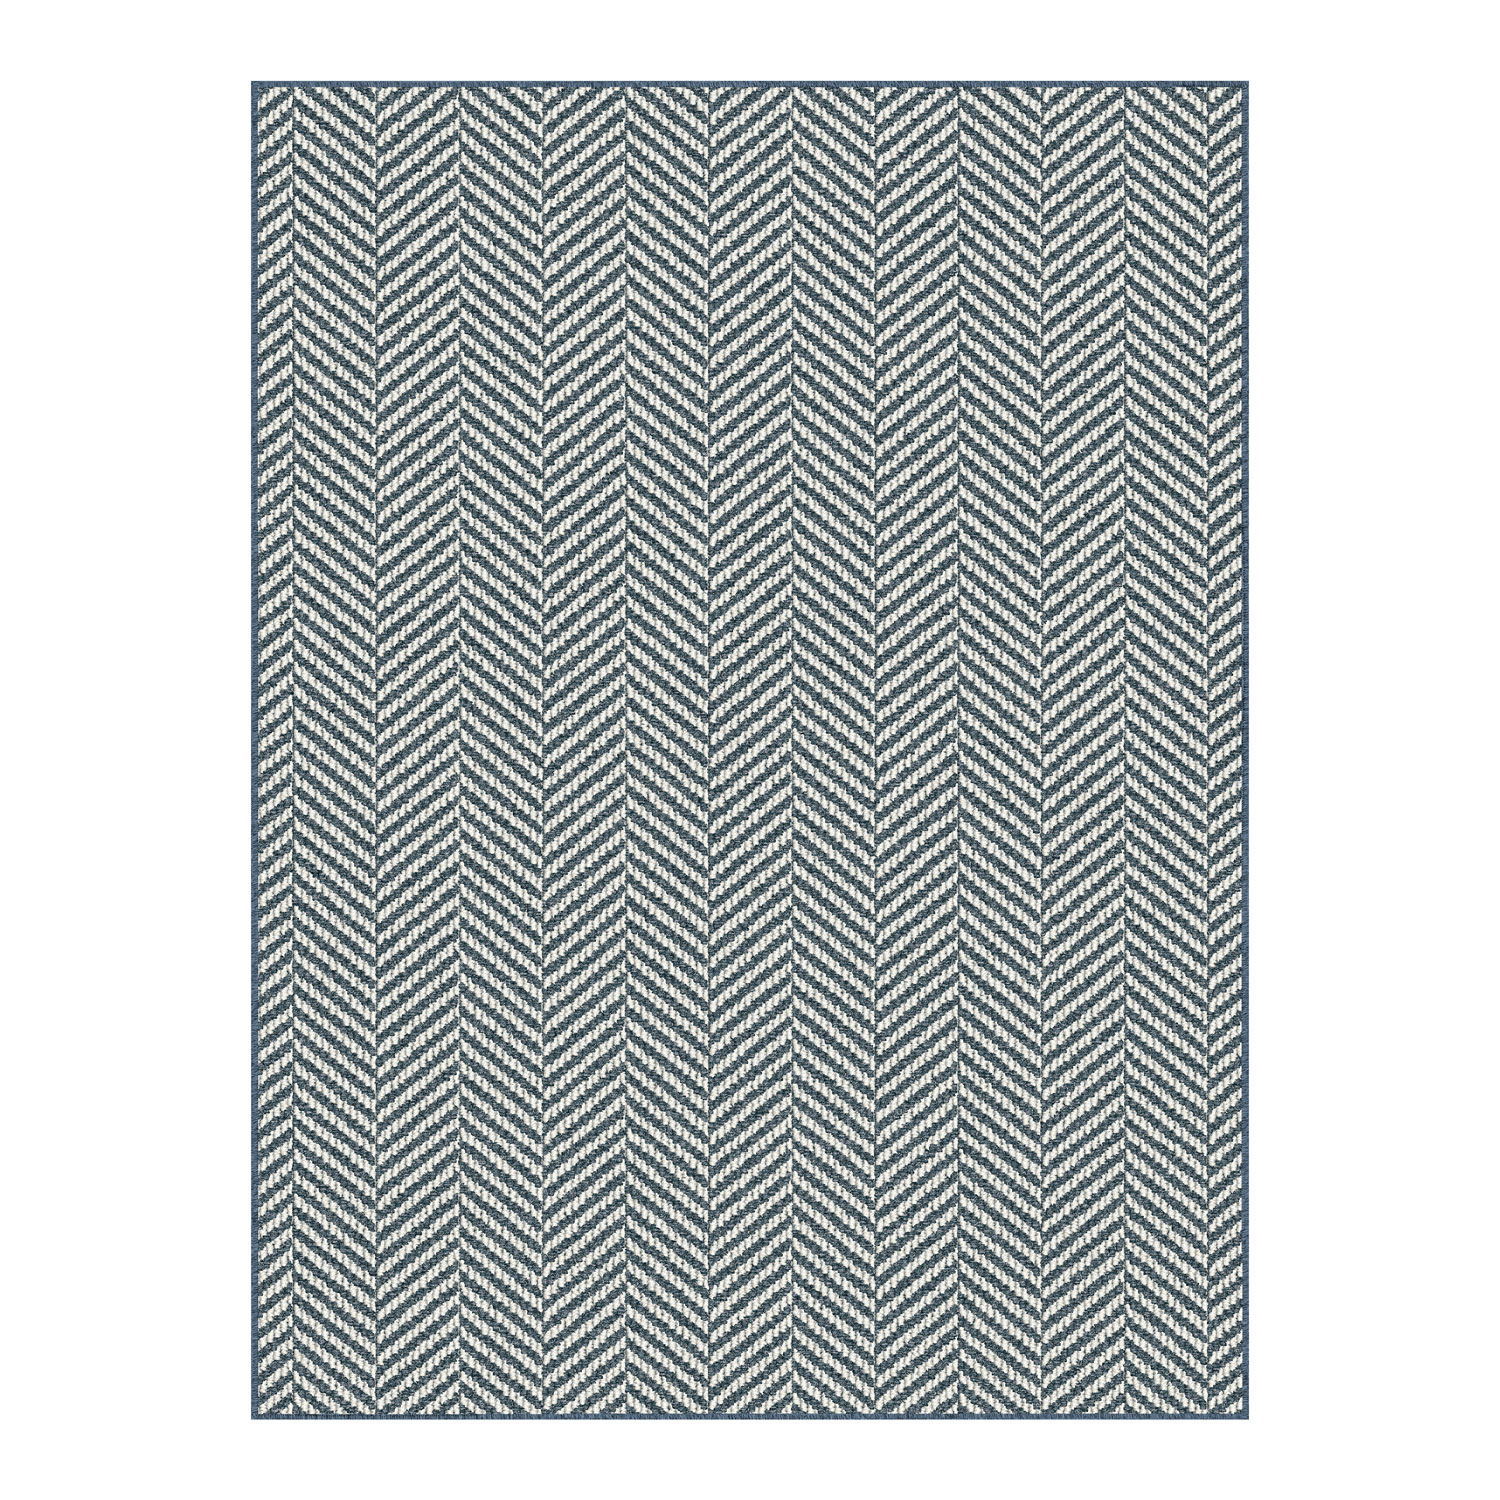 TRIDENT Collection, rug, blue-grey, 3'x4'